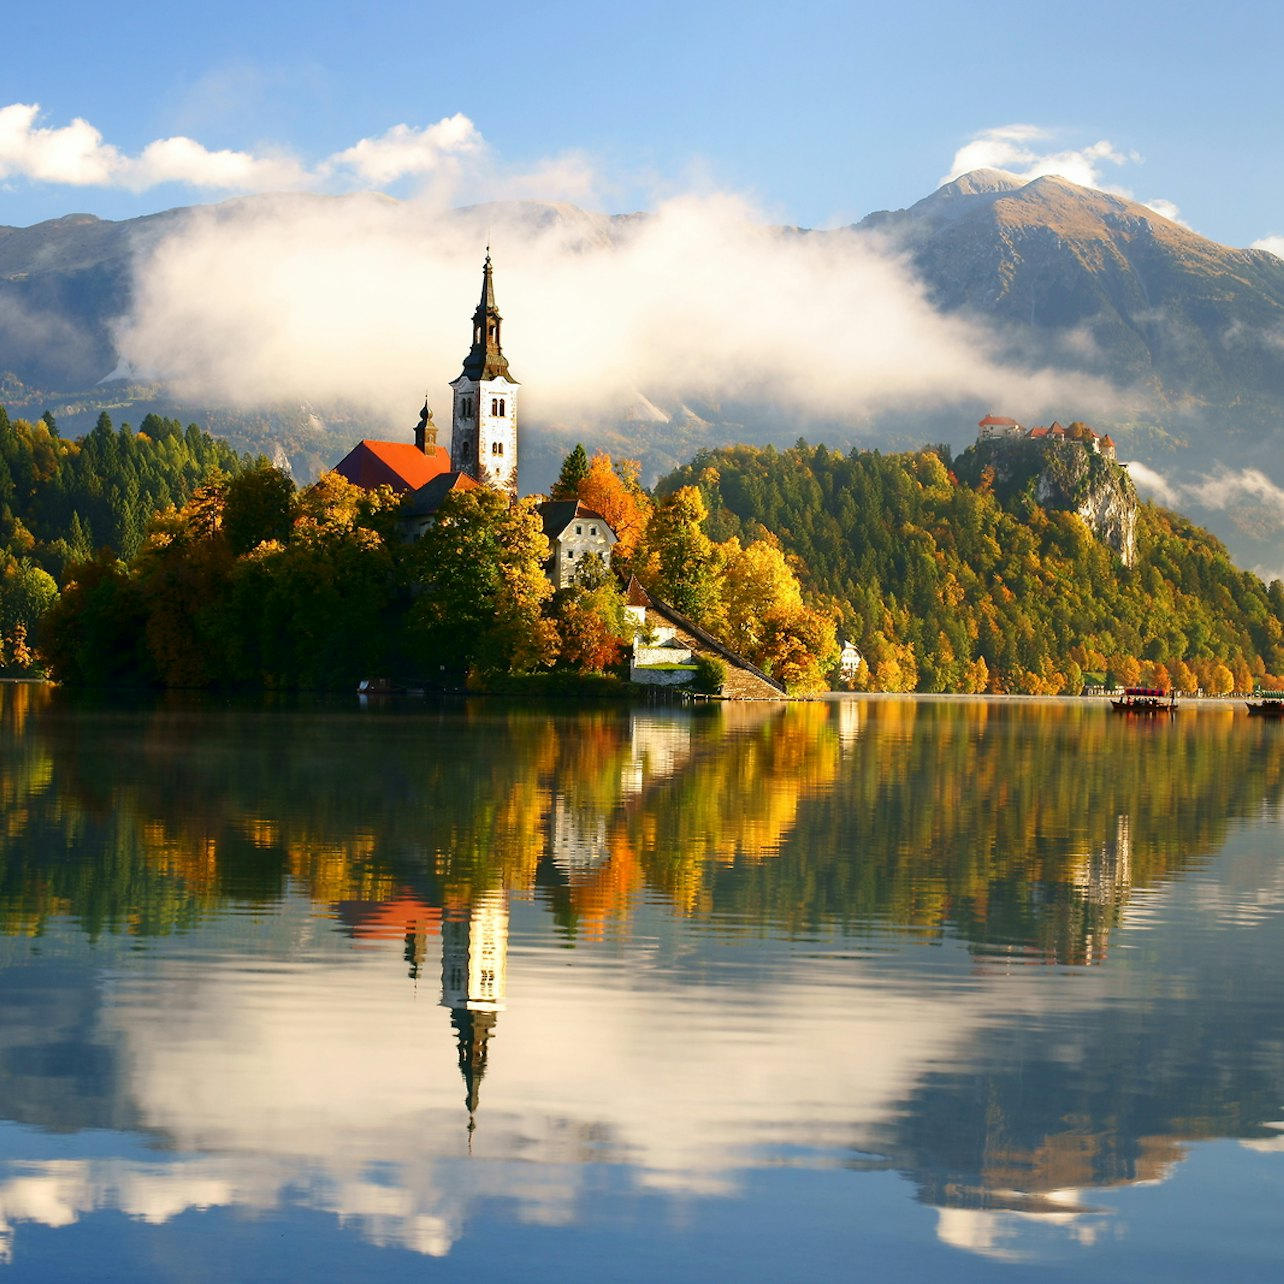 BERGFEX: Bled: Vacances Bled - Voyager Bled